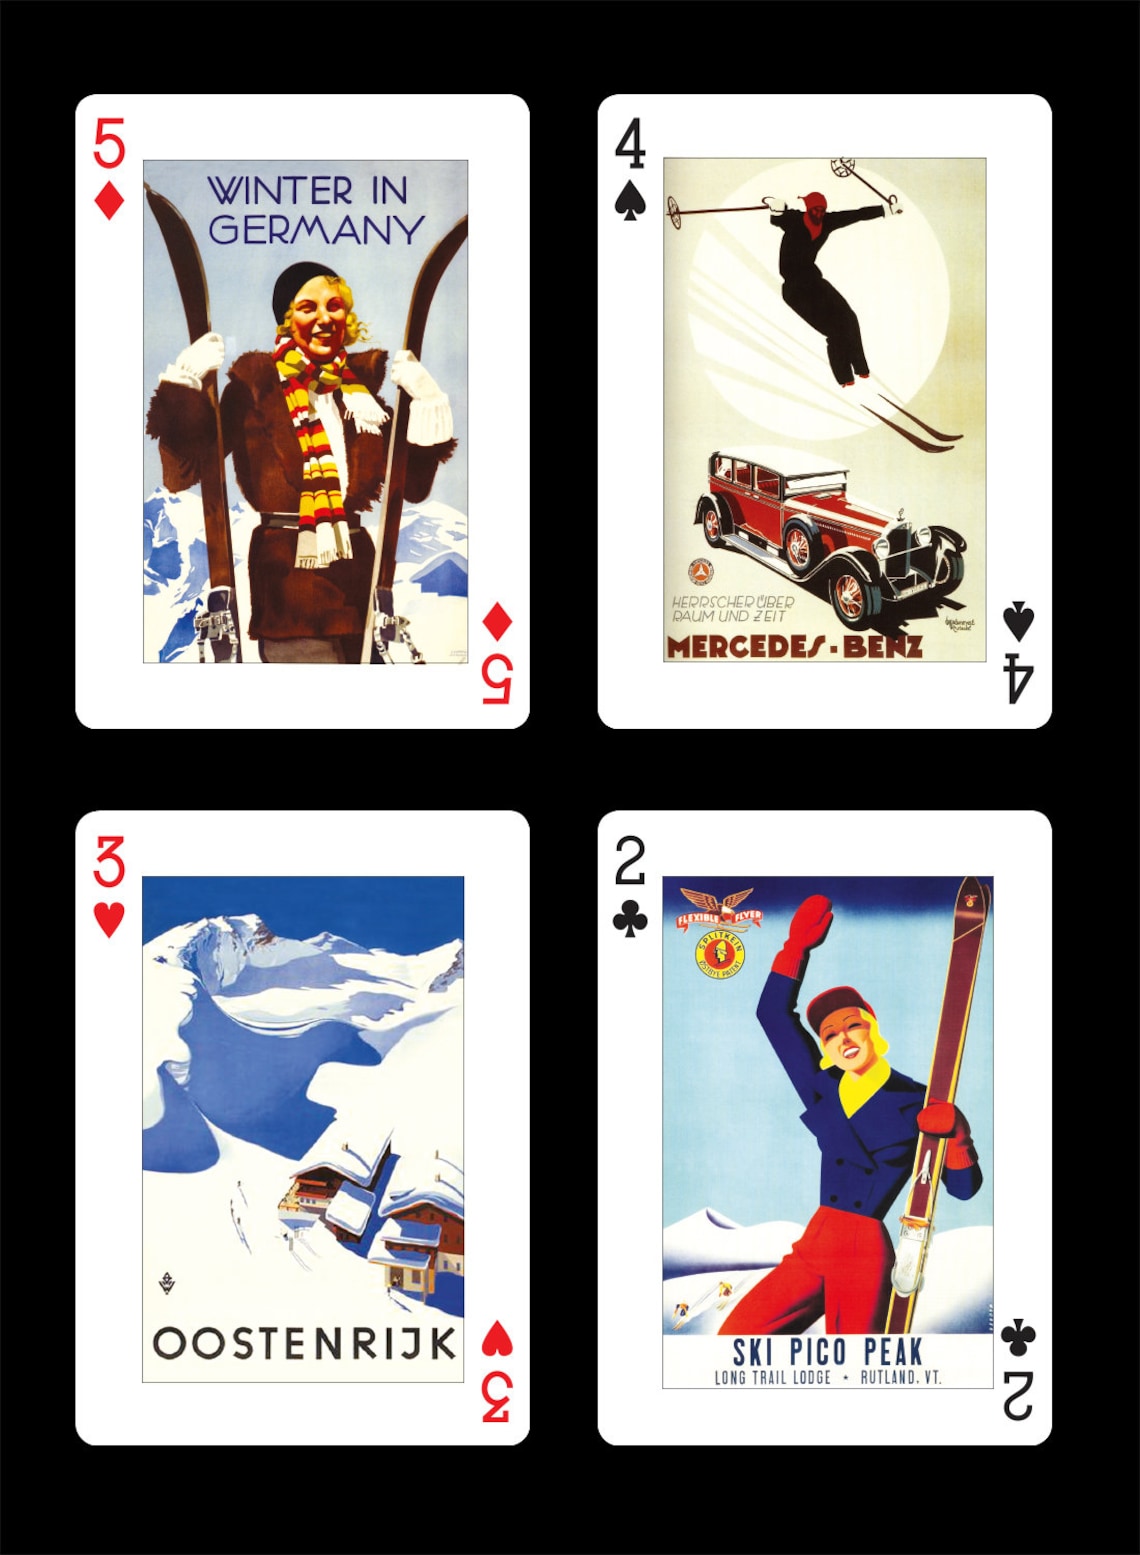 Image of 4 paying cards with art from famous vintage transport and sporting posters. Winter in Germany, Mercedes-Benz, Oostenrijk & Ski Pico Peak